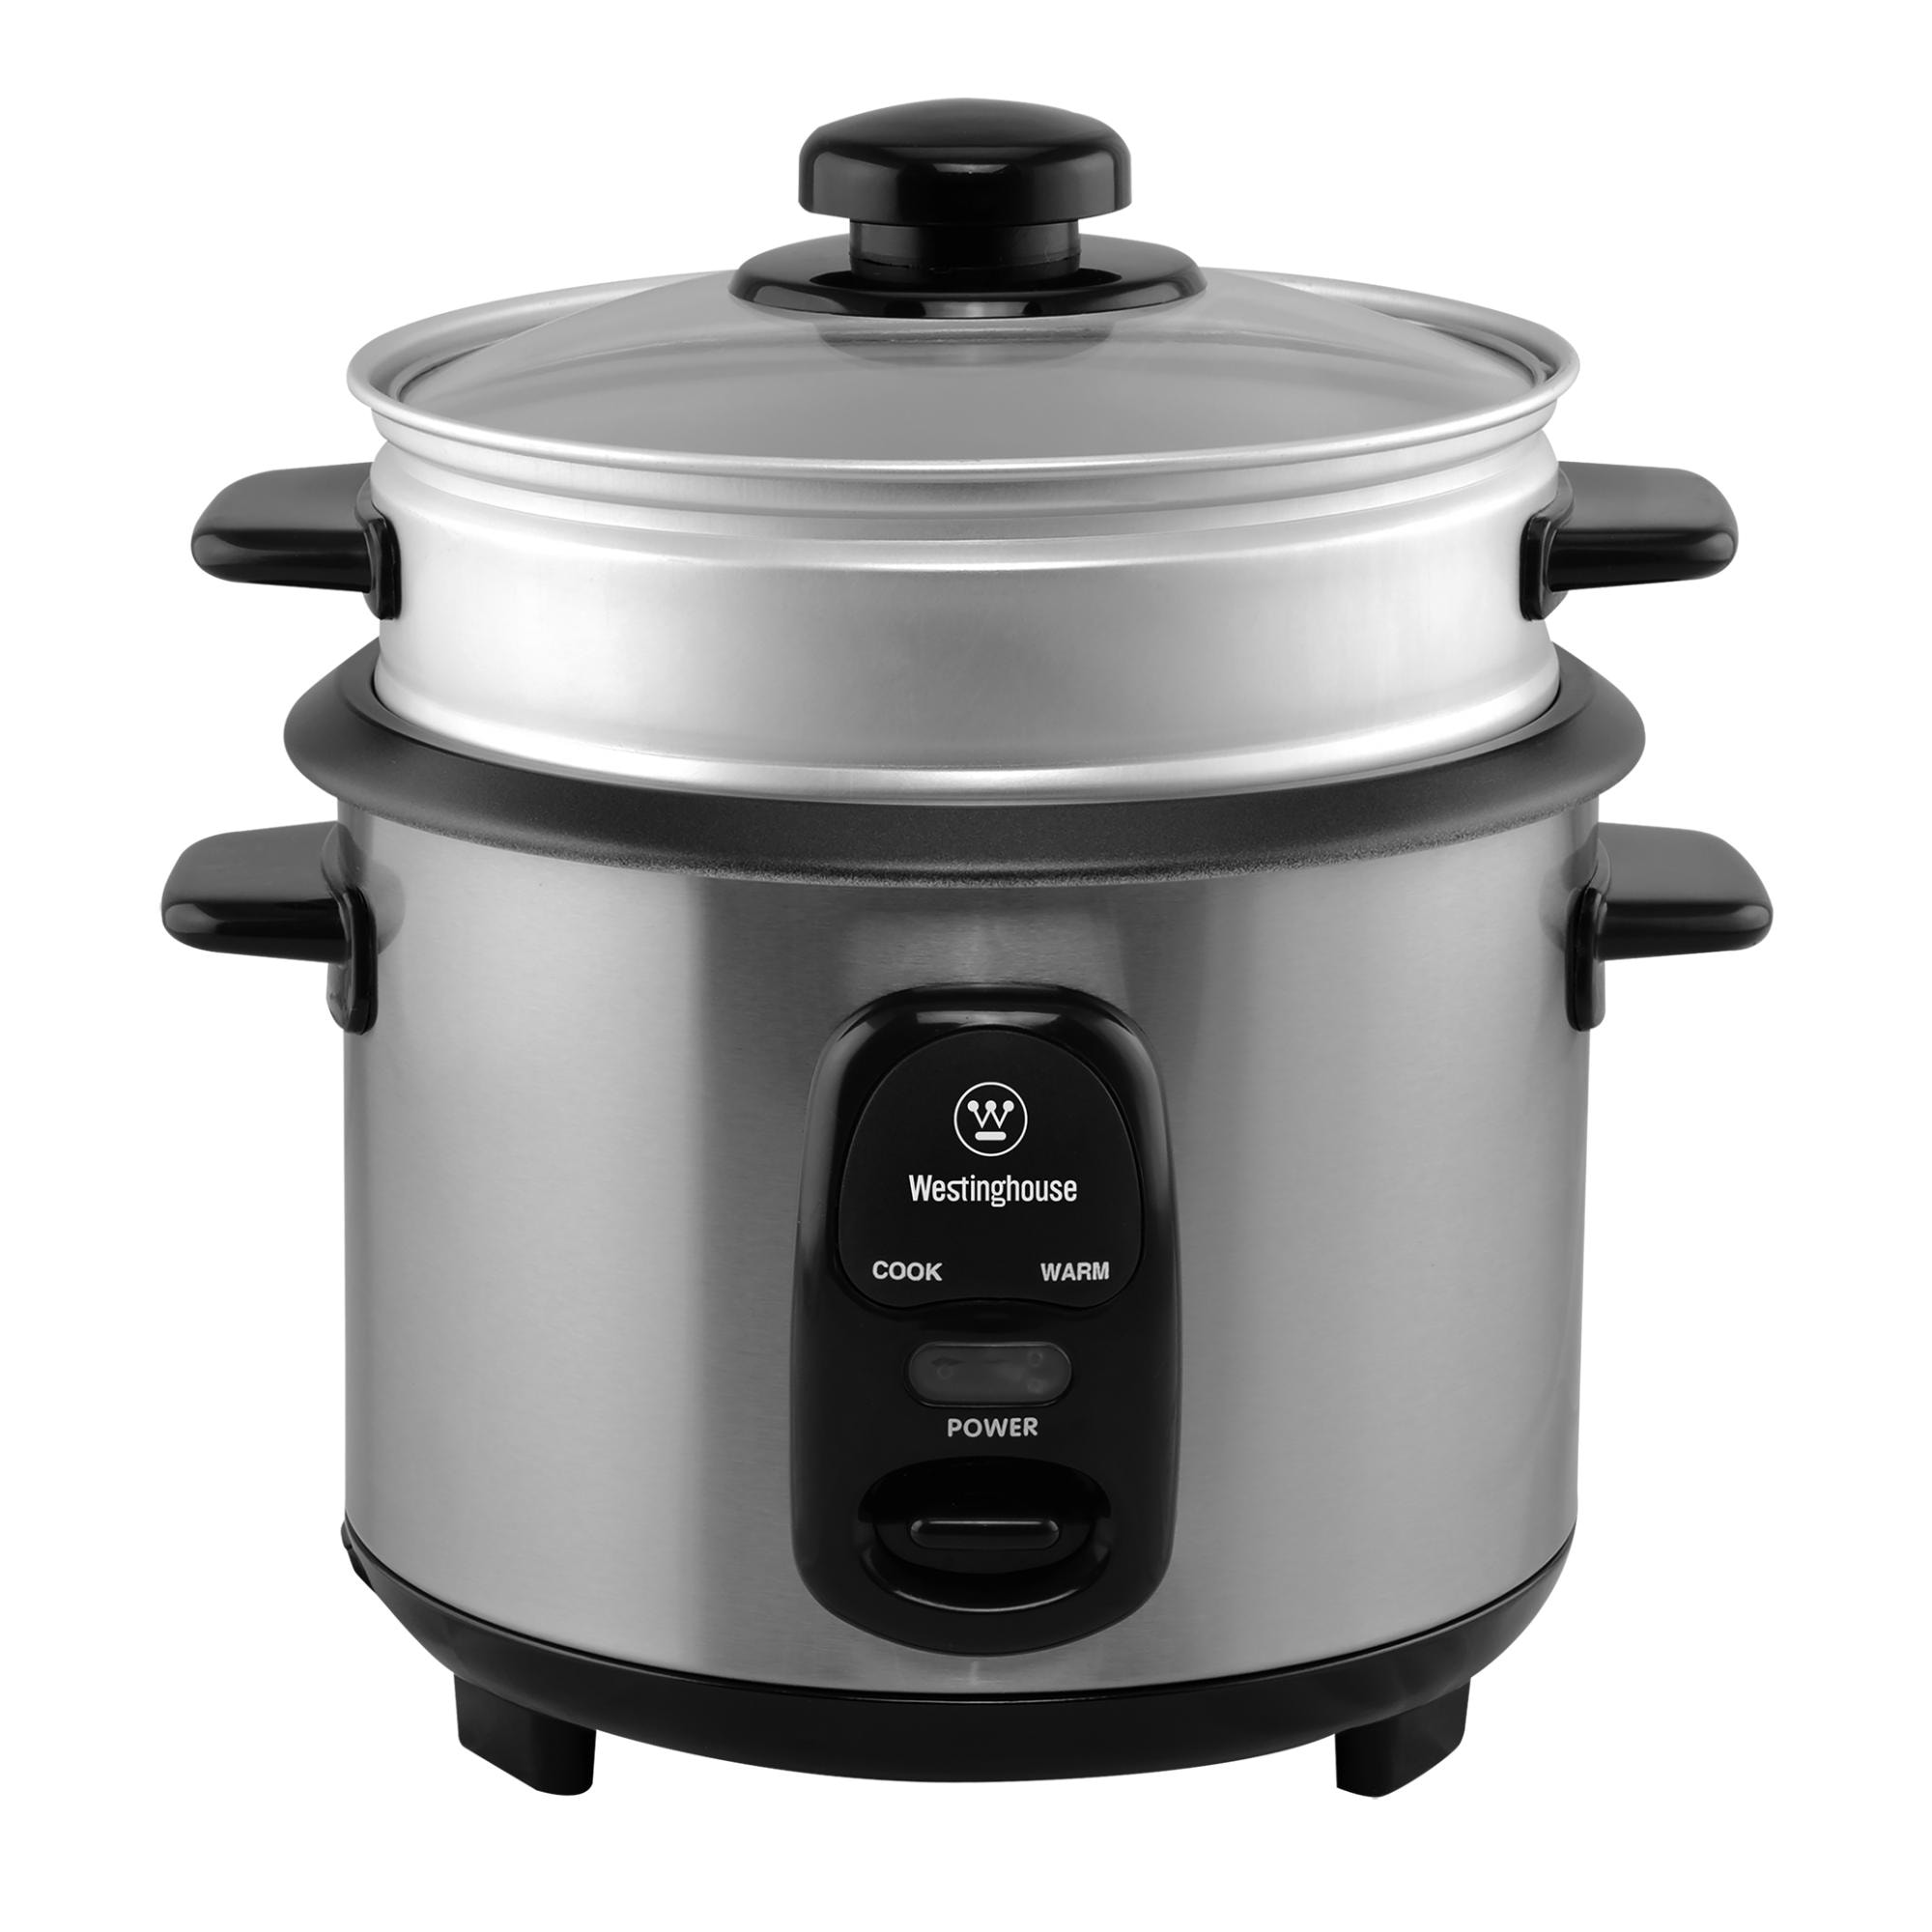 https://ak1.ostkcdn.com/images/products/is/images/direct/0a85e4eed9652b2a591aabd6913410ed31a9bad1/5-Cup-Rice-Cooker---Stainless-Steel.jpg